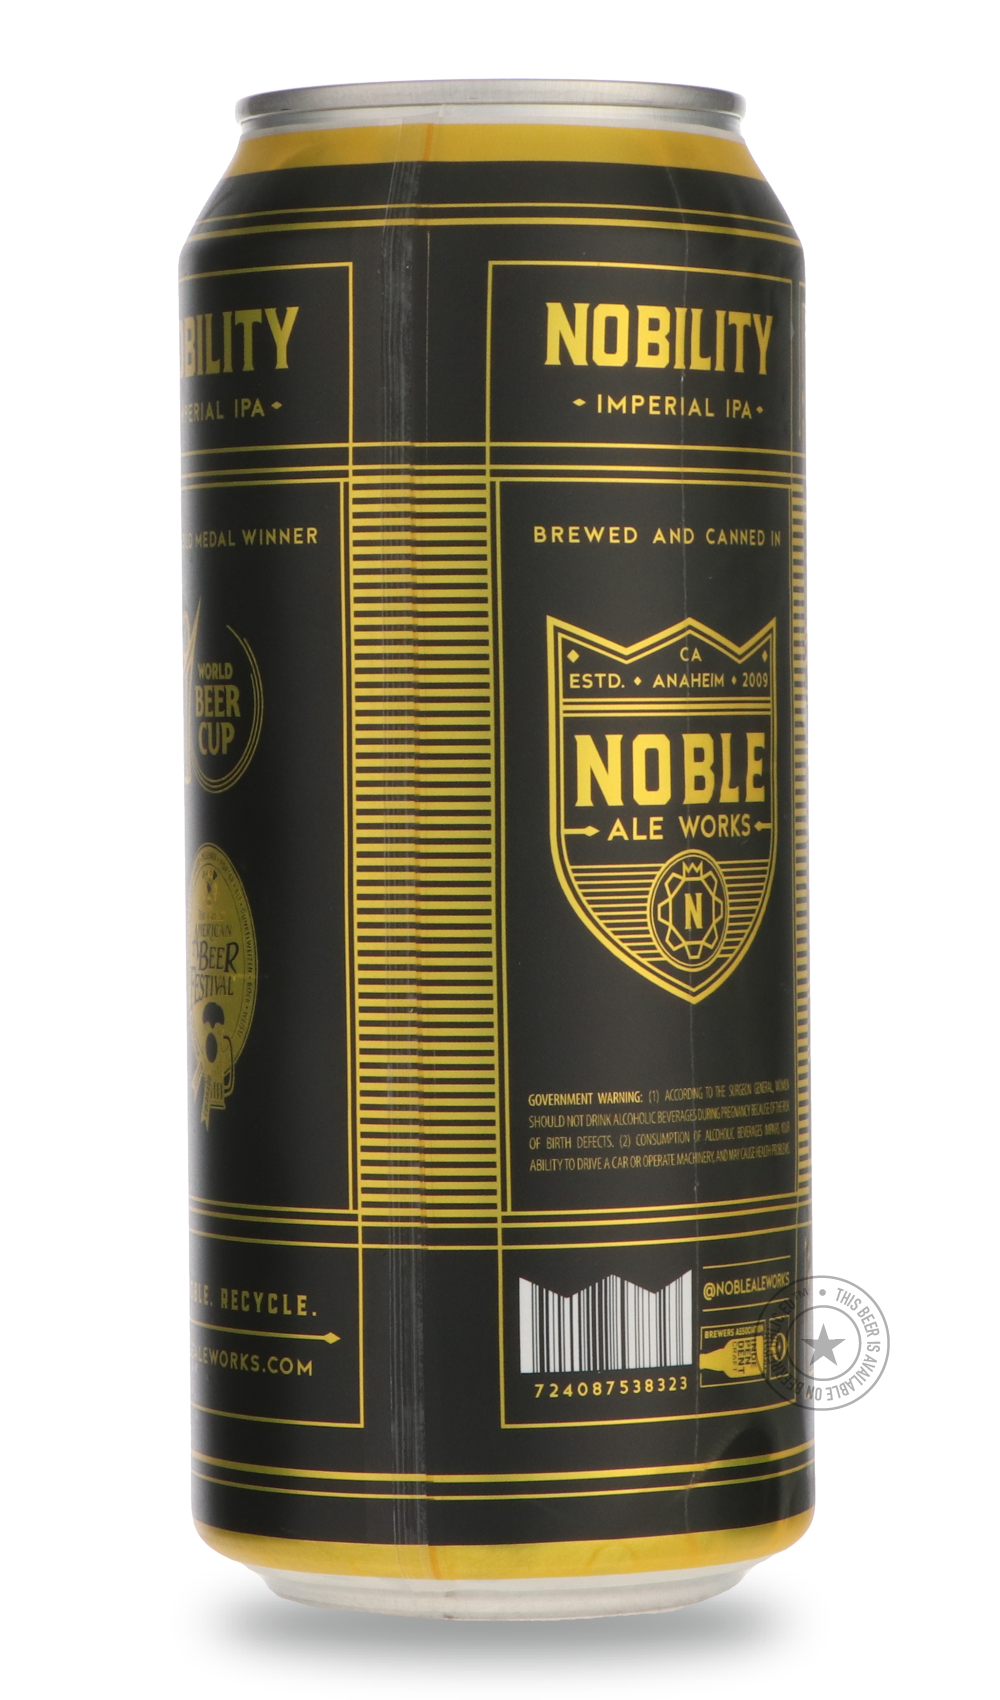 -Noble- Nobility-IPA- Only @ Beer Republic - The best online beer store for American & Canadian craft beer - Buy beer online from the USA and Canada - Bier online kopen - Amerikaans bier kopen - Craft beer store - Craft beer kopen - Amerikanisch bier kaufen - Bier online kaufen - Acheter biere online - IPA - Stout - Porter - New England IPA - Hazy IPA - Imperial Stout - Barrel Aged - Barrel Aged Imperial Stout - Brown - Dark beer - Blond - Blonde - Pilsner - Lager - Wheat - Weizen - Amber - Barley Wine - Qu